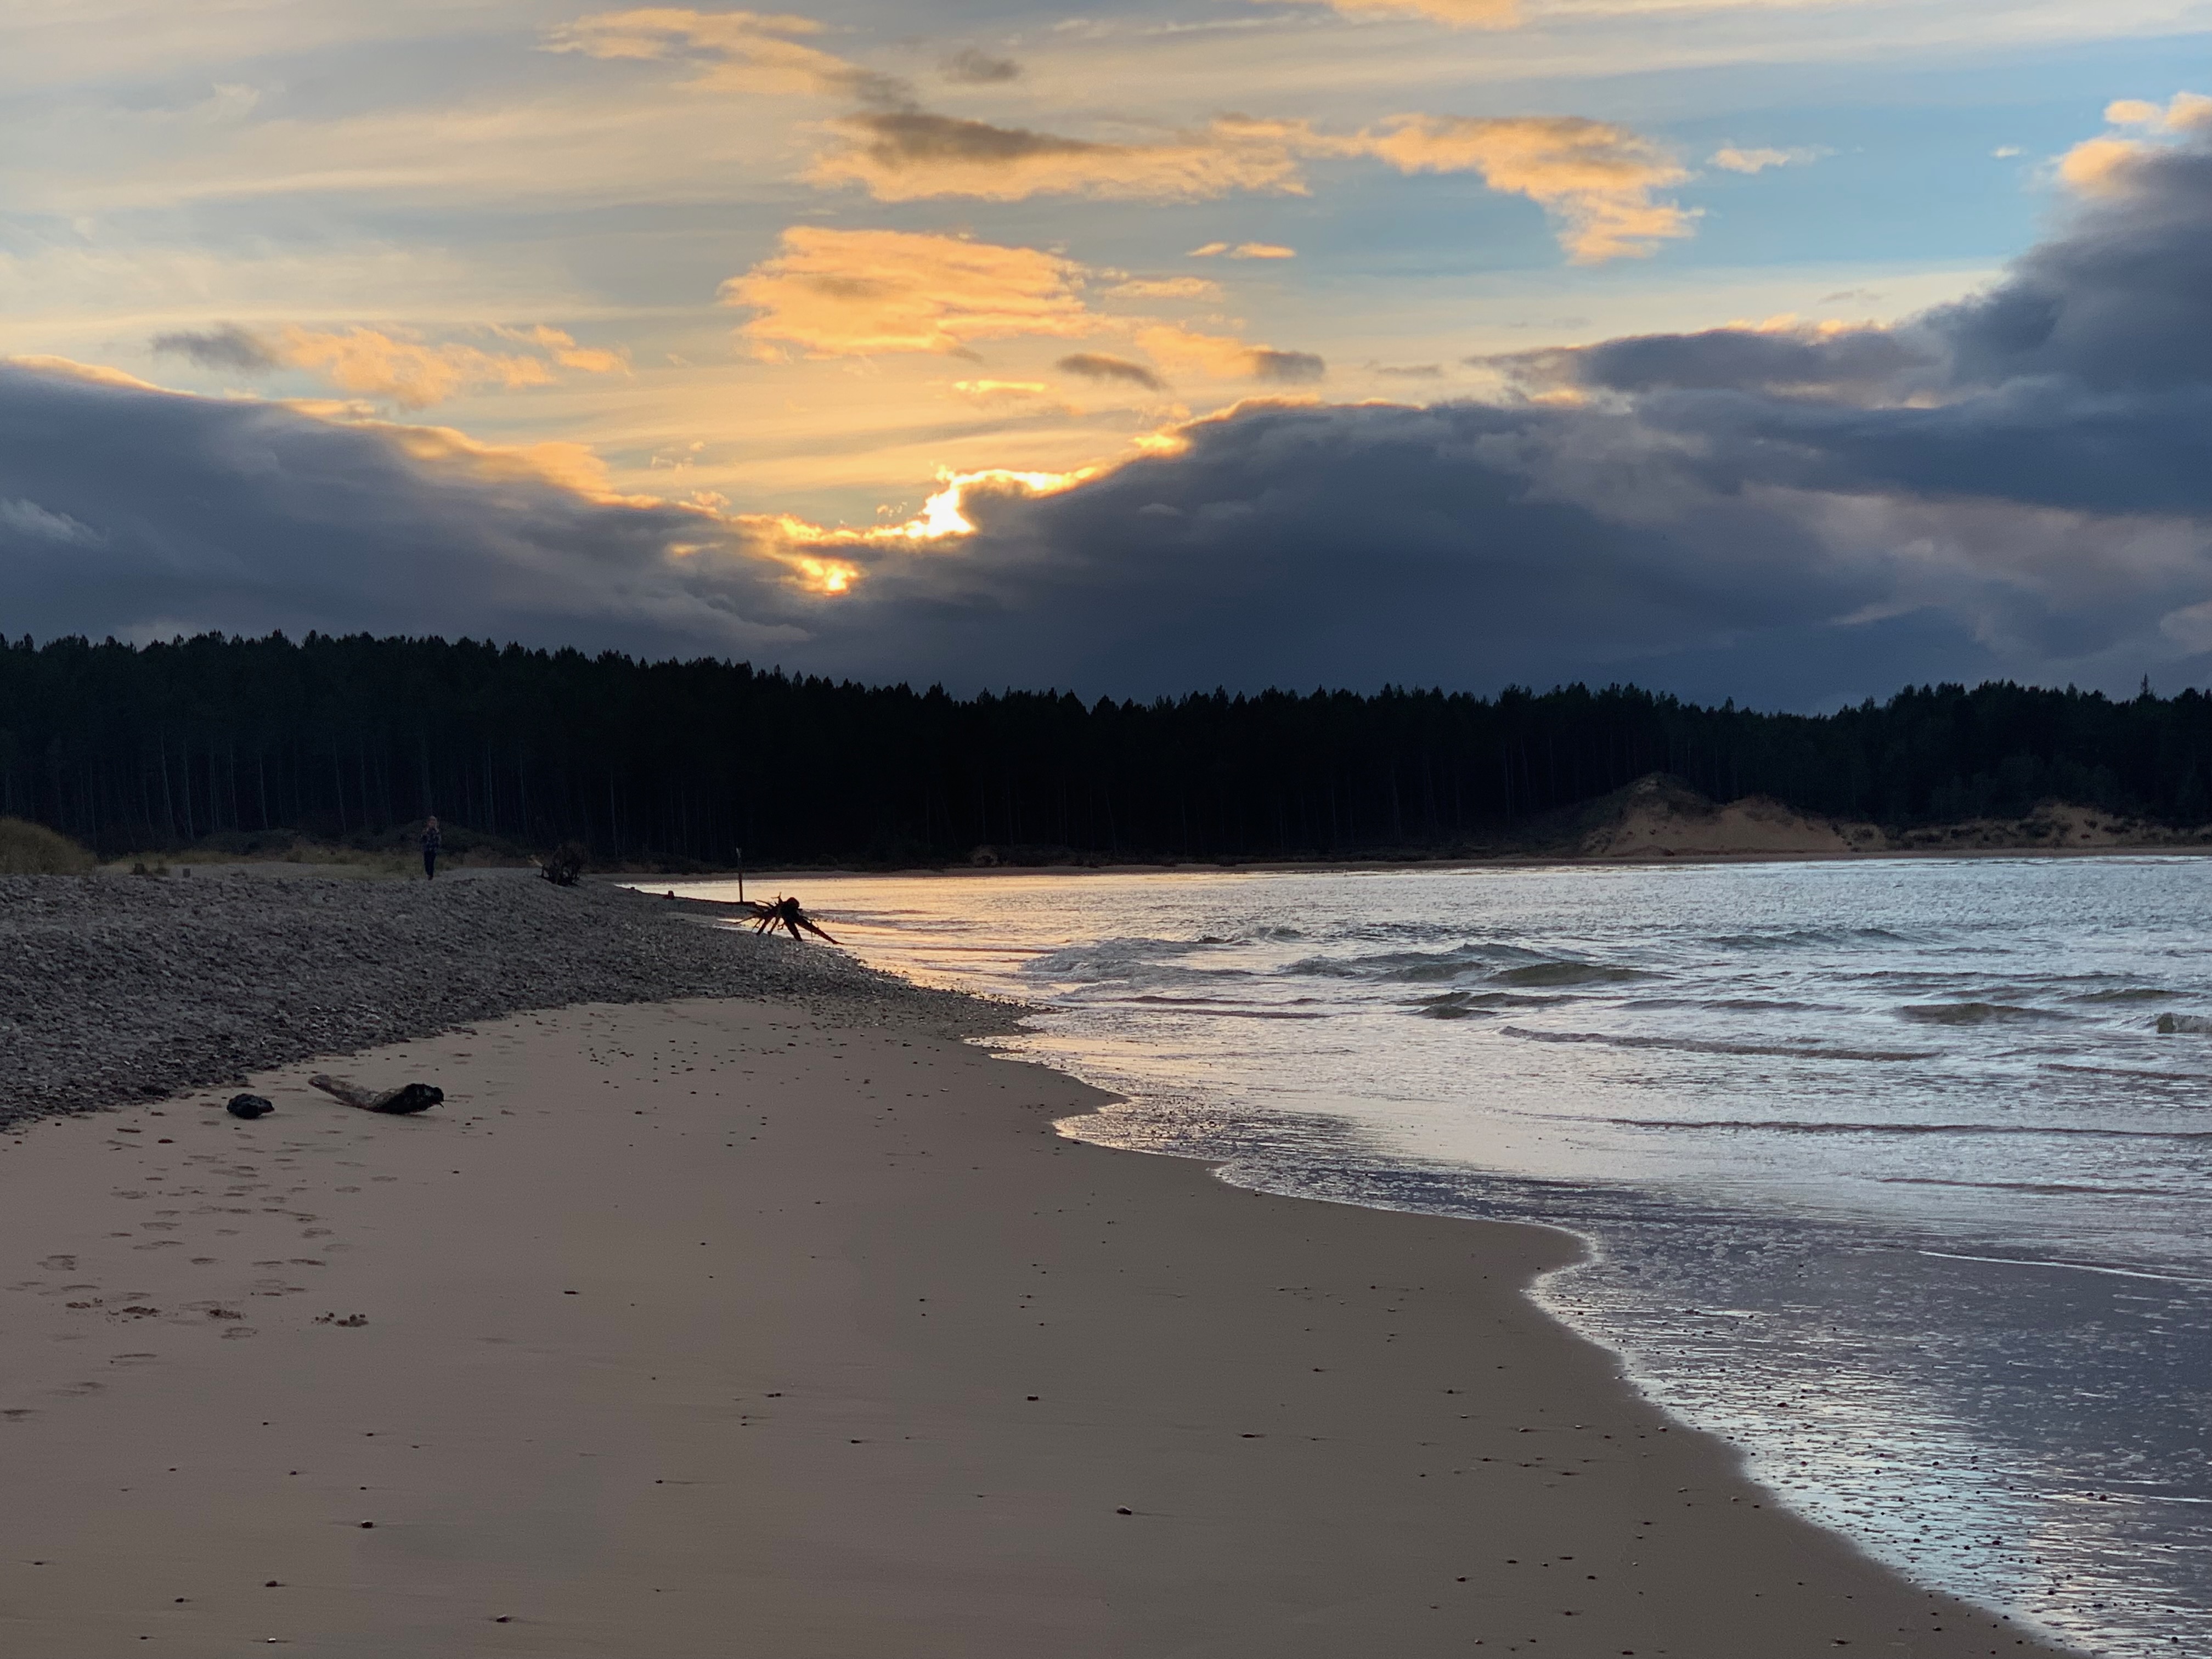 The sunset over Findhorn Bay in Scotland, a moody cloudly picture